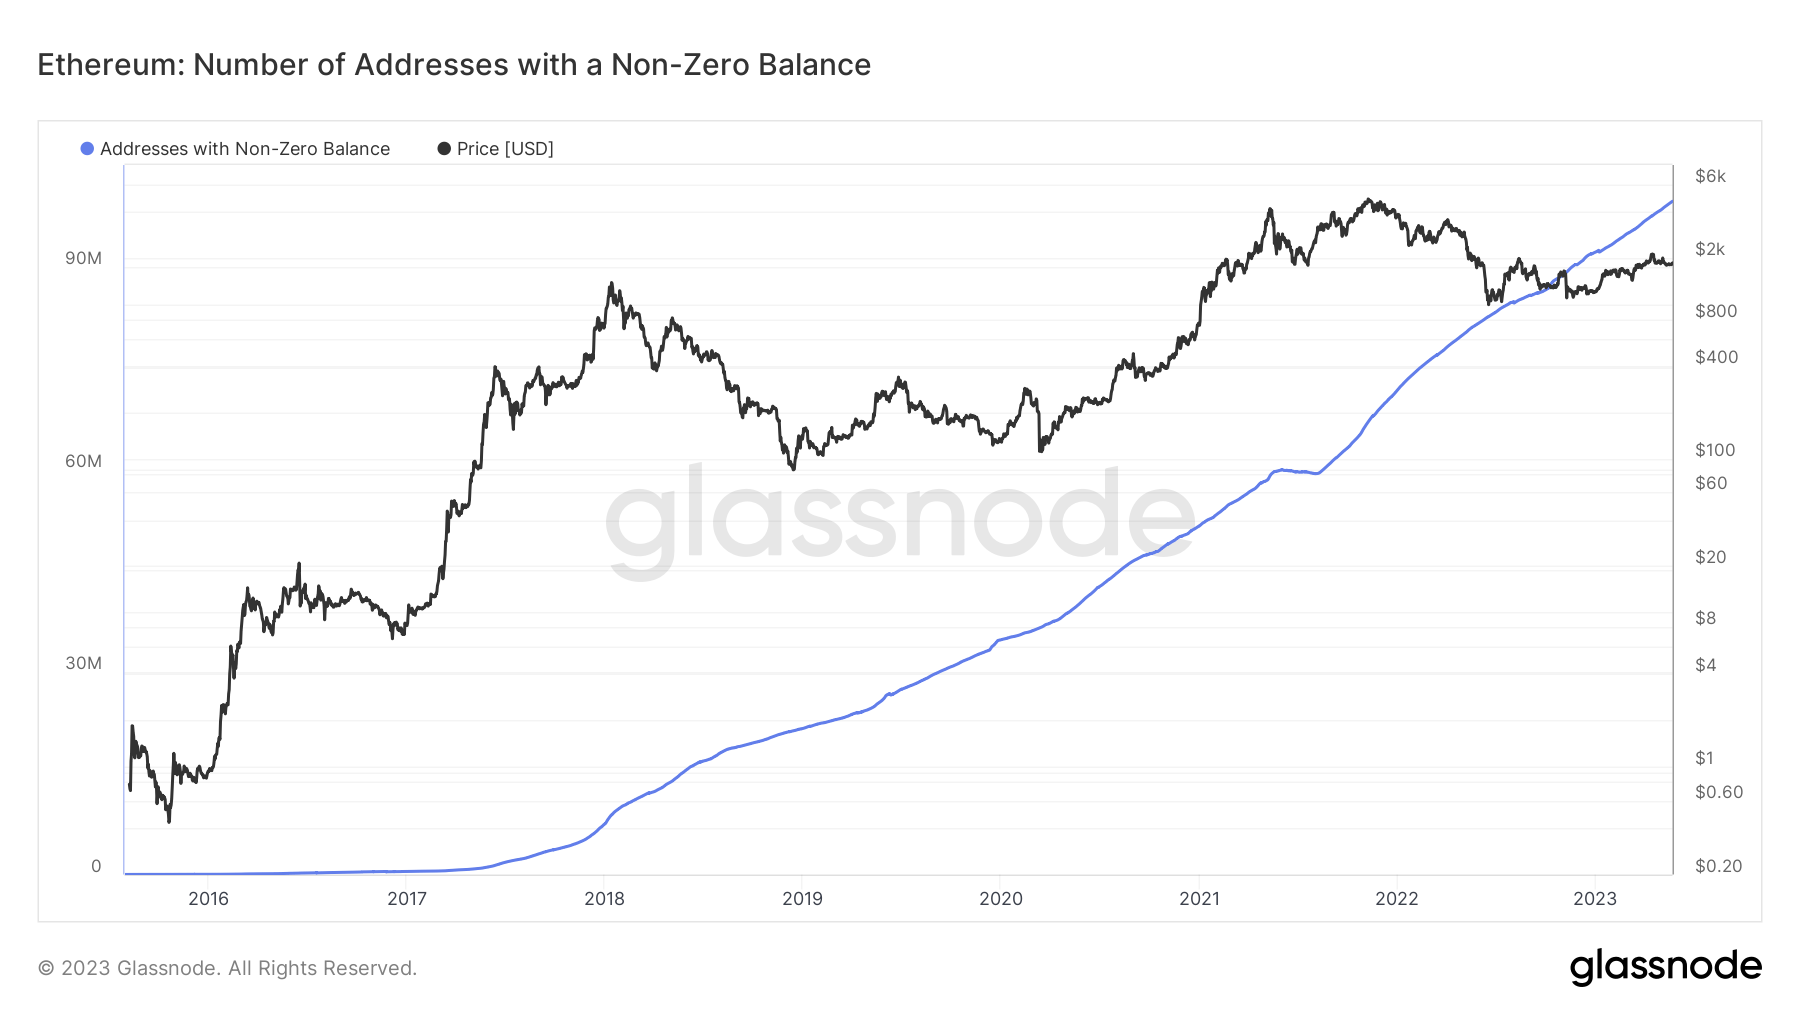 This is a chart showing how the number of Ethereum addresses has grown over time.